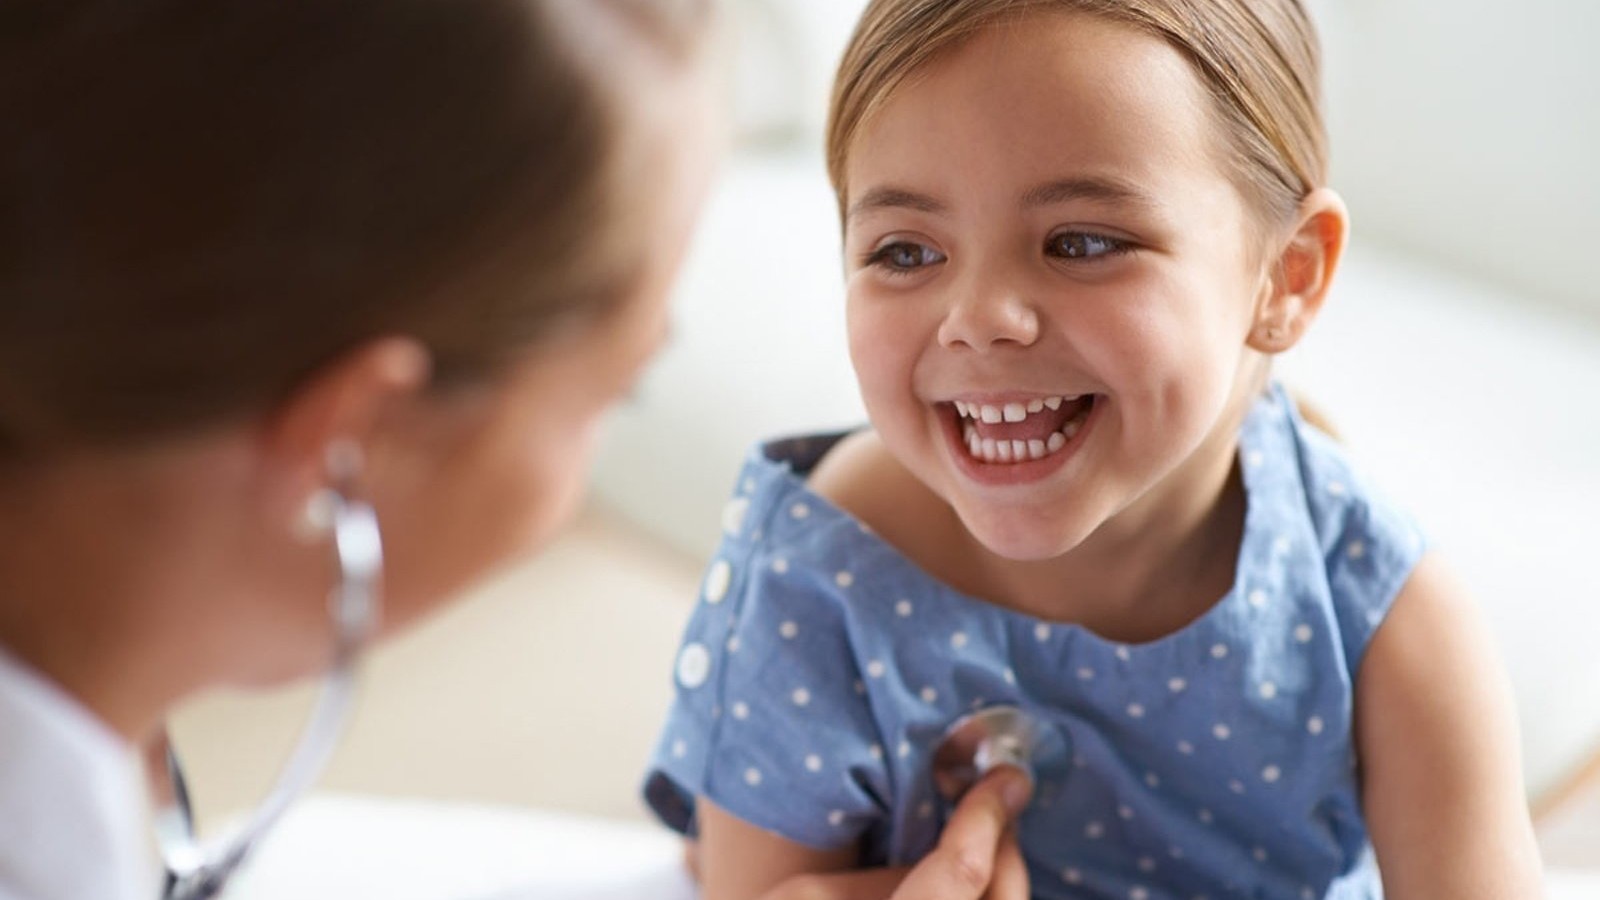 A smiling young girl being examined by a doctor.